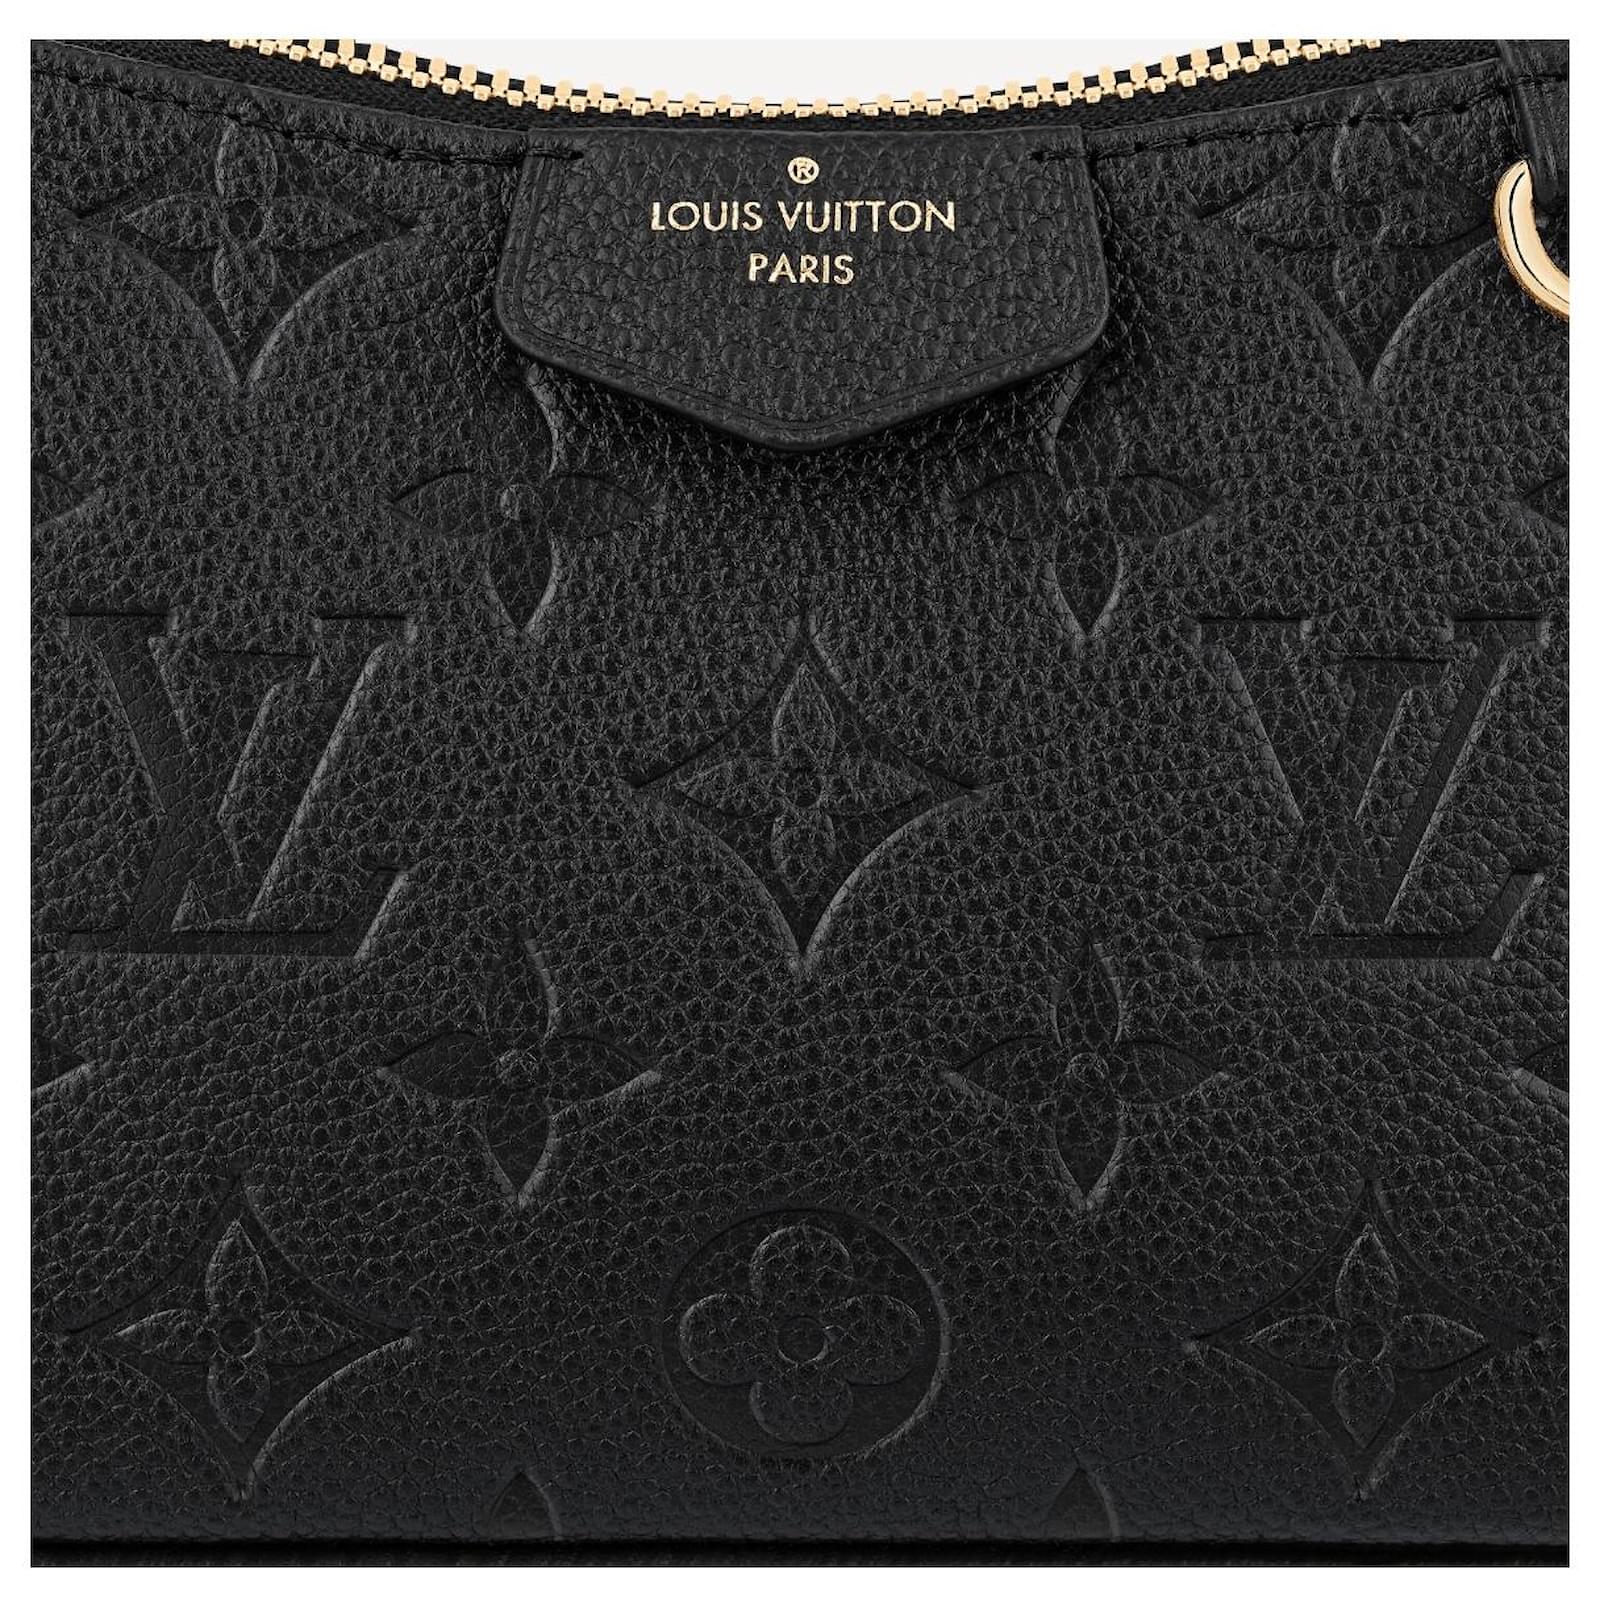 Louis Vuitton Easy Pouch on Strap, Black, One Size